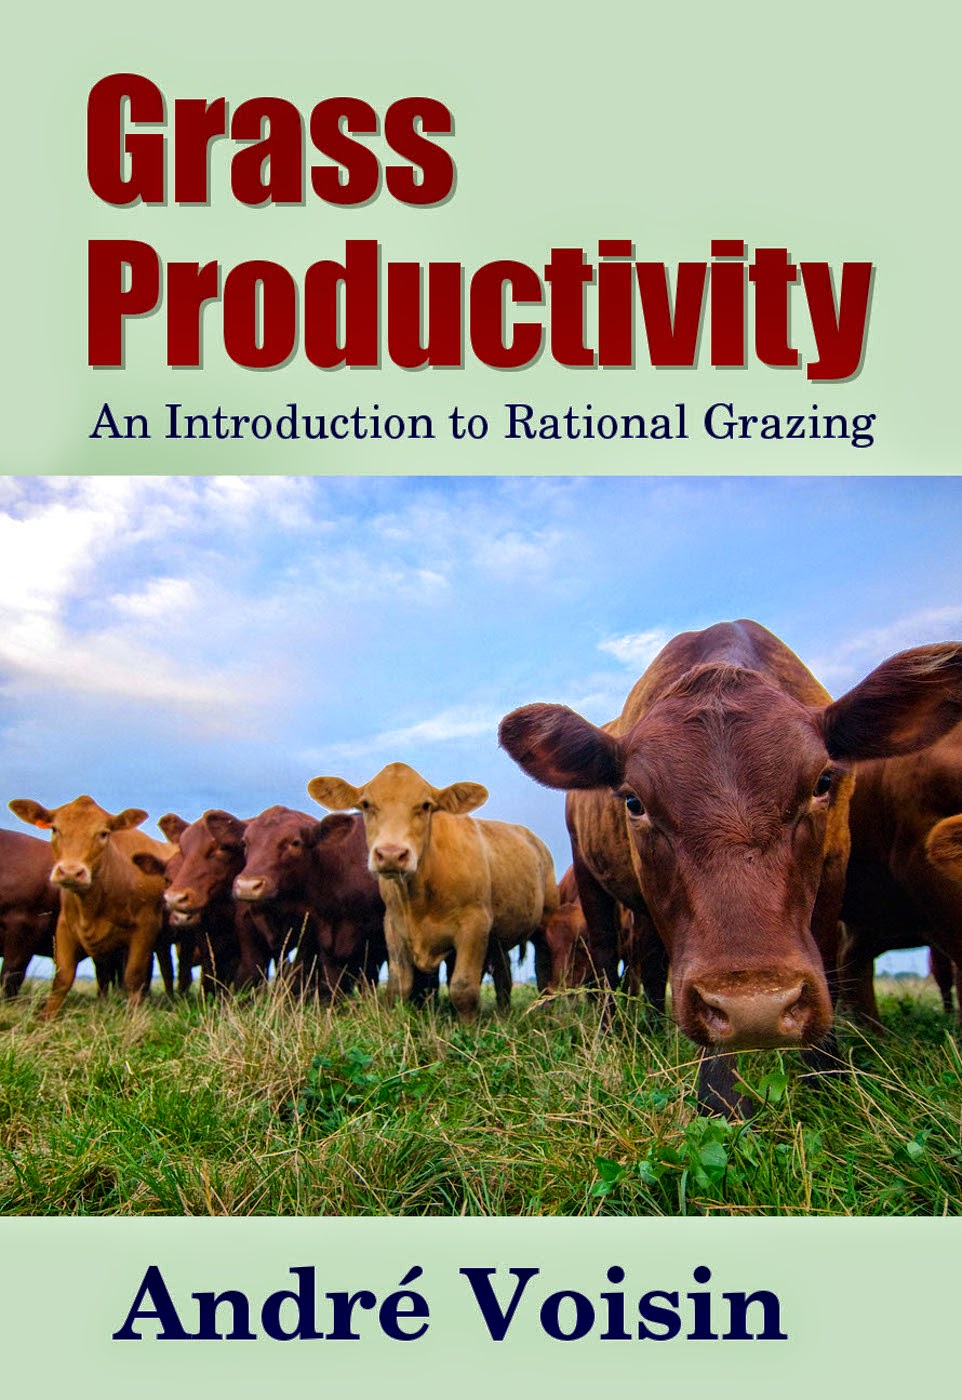 Grass Productivity - An Introduction to Rational Grazing